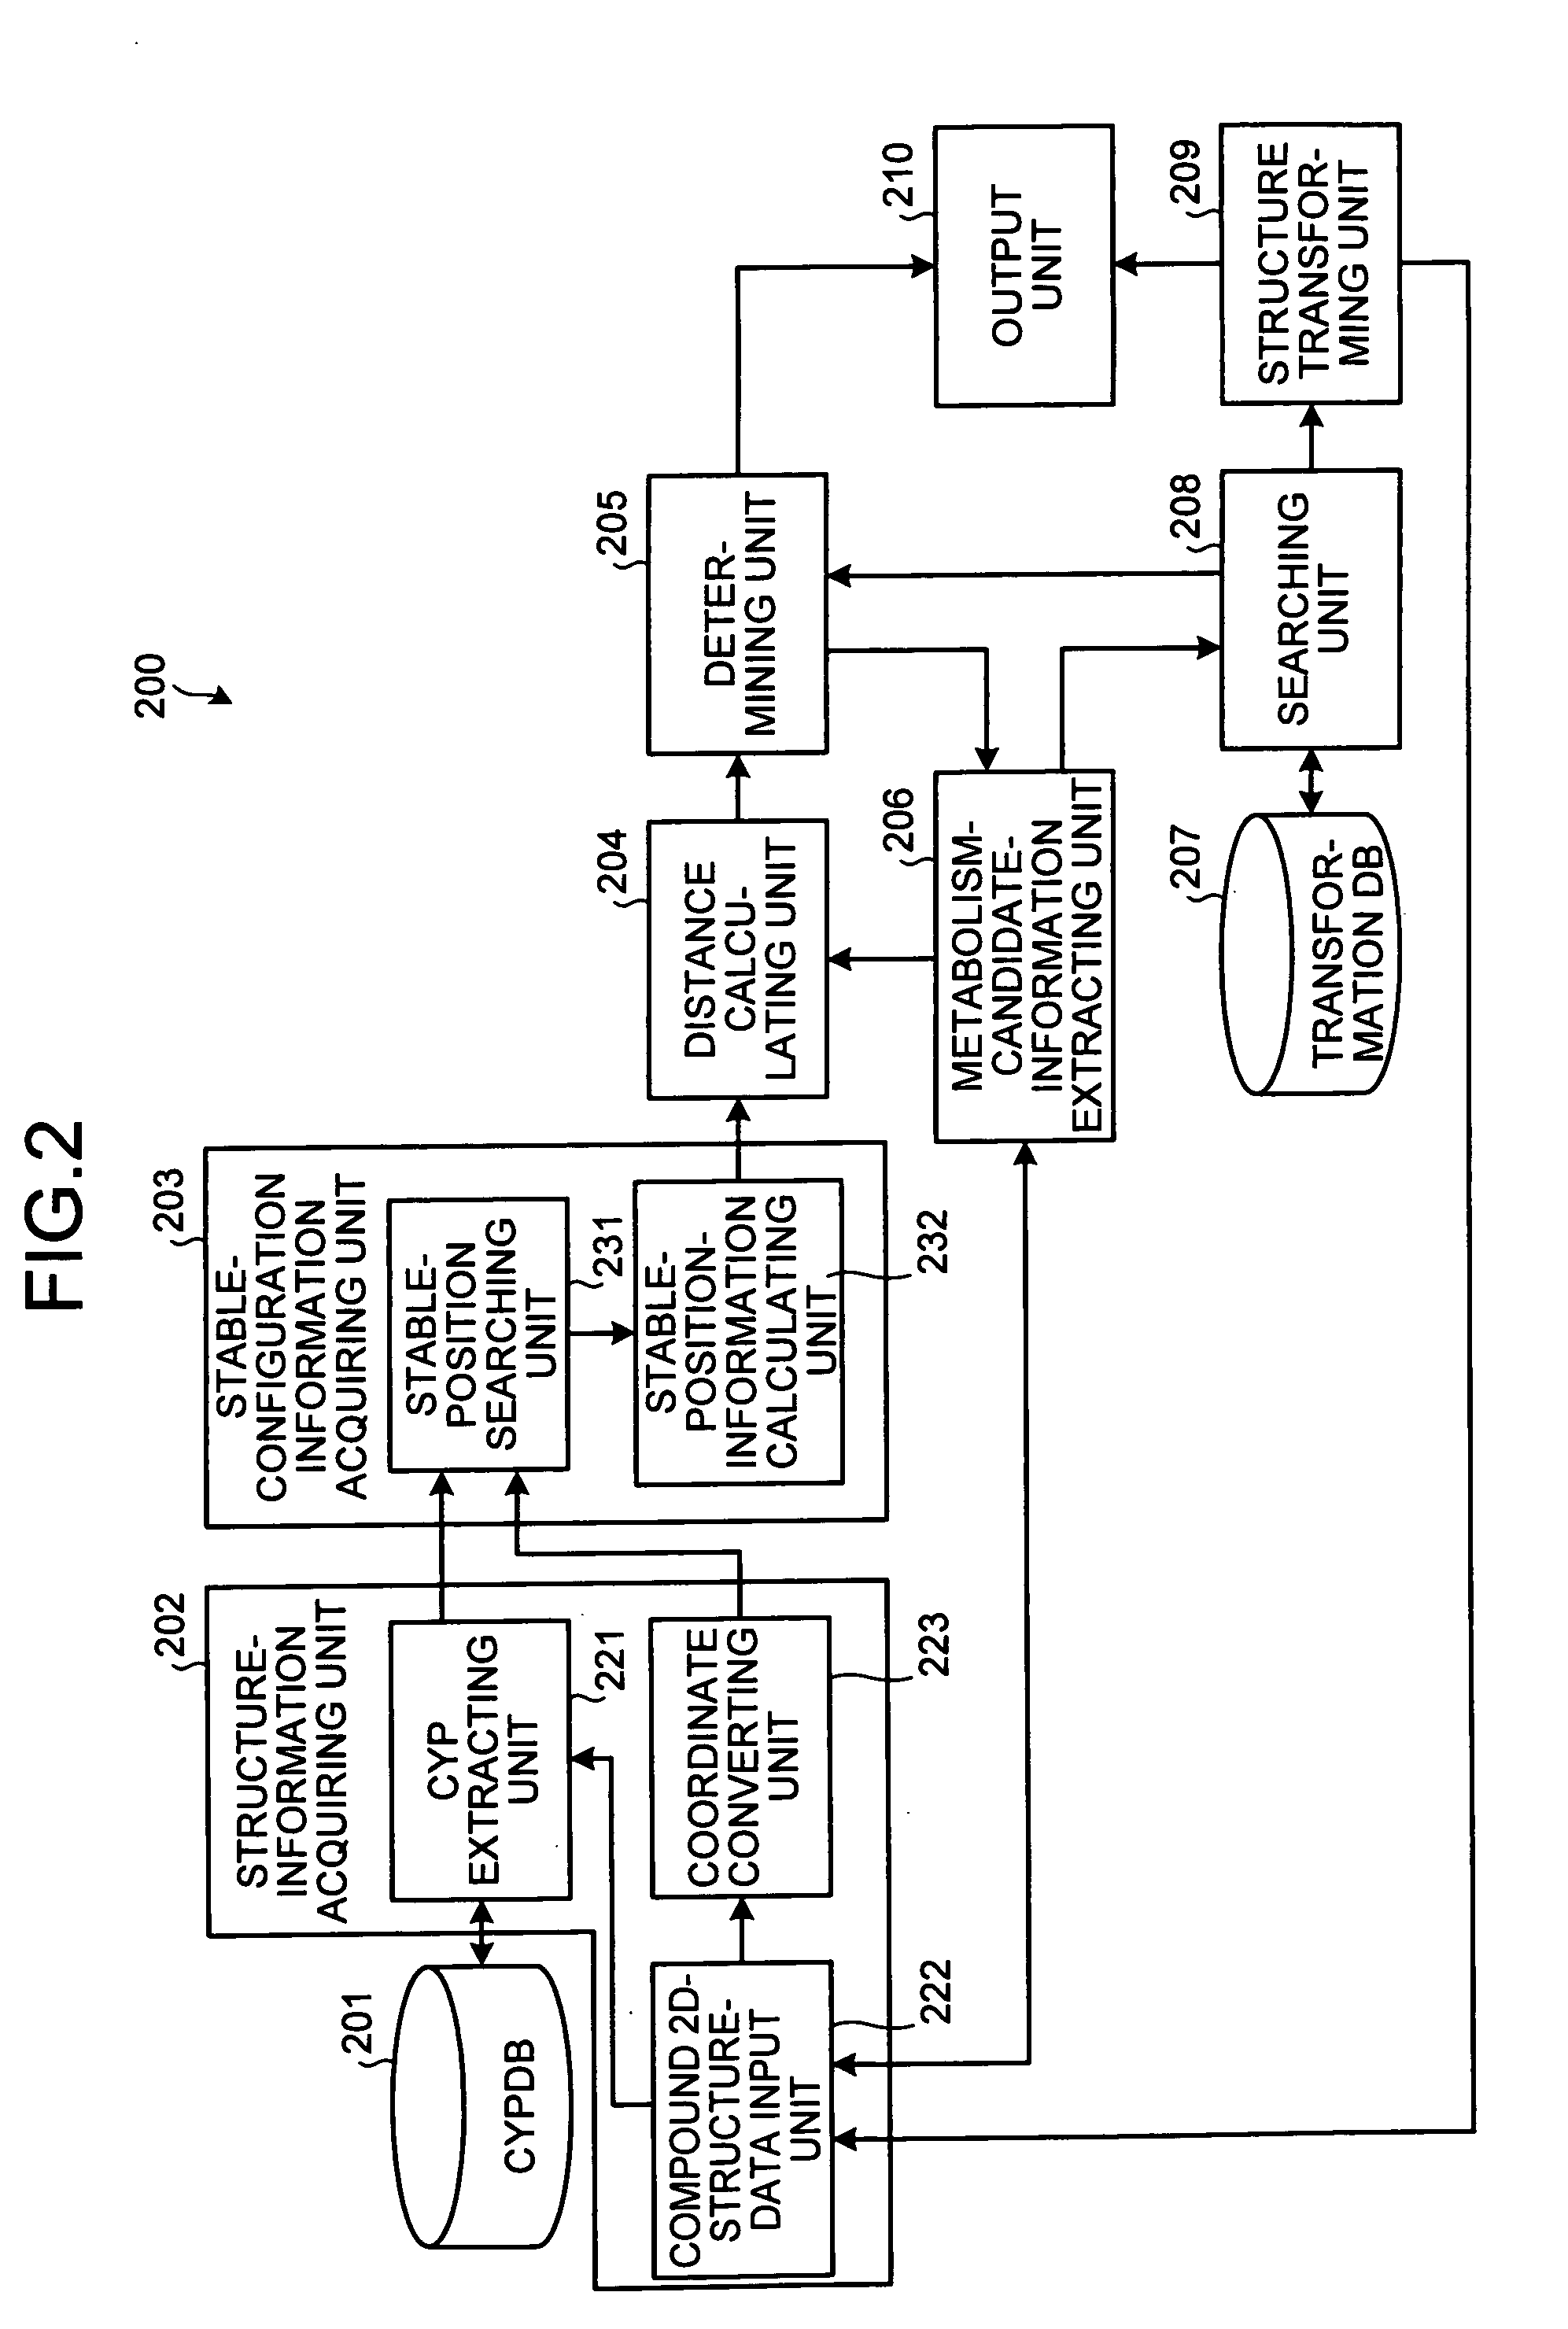 Apparatus, method, and computer product for supporting estimation of metabolism